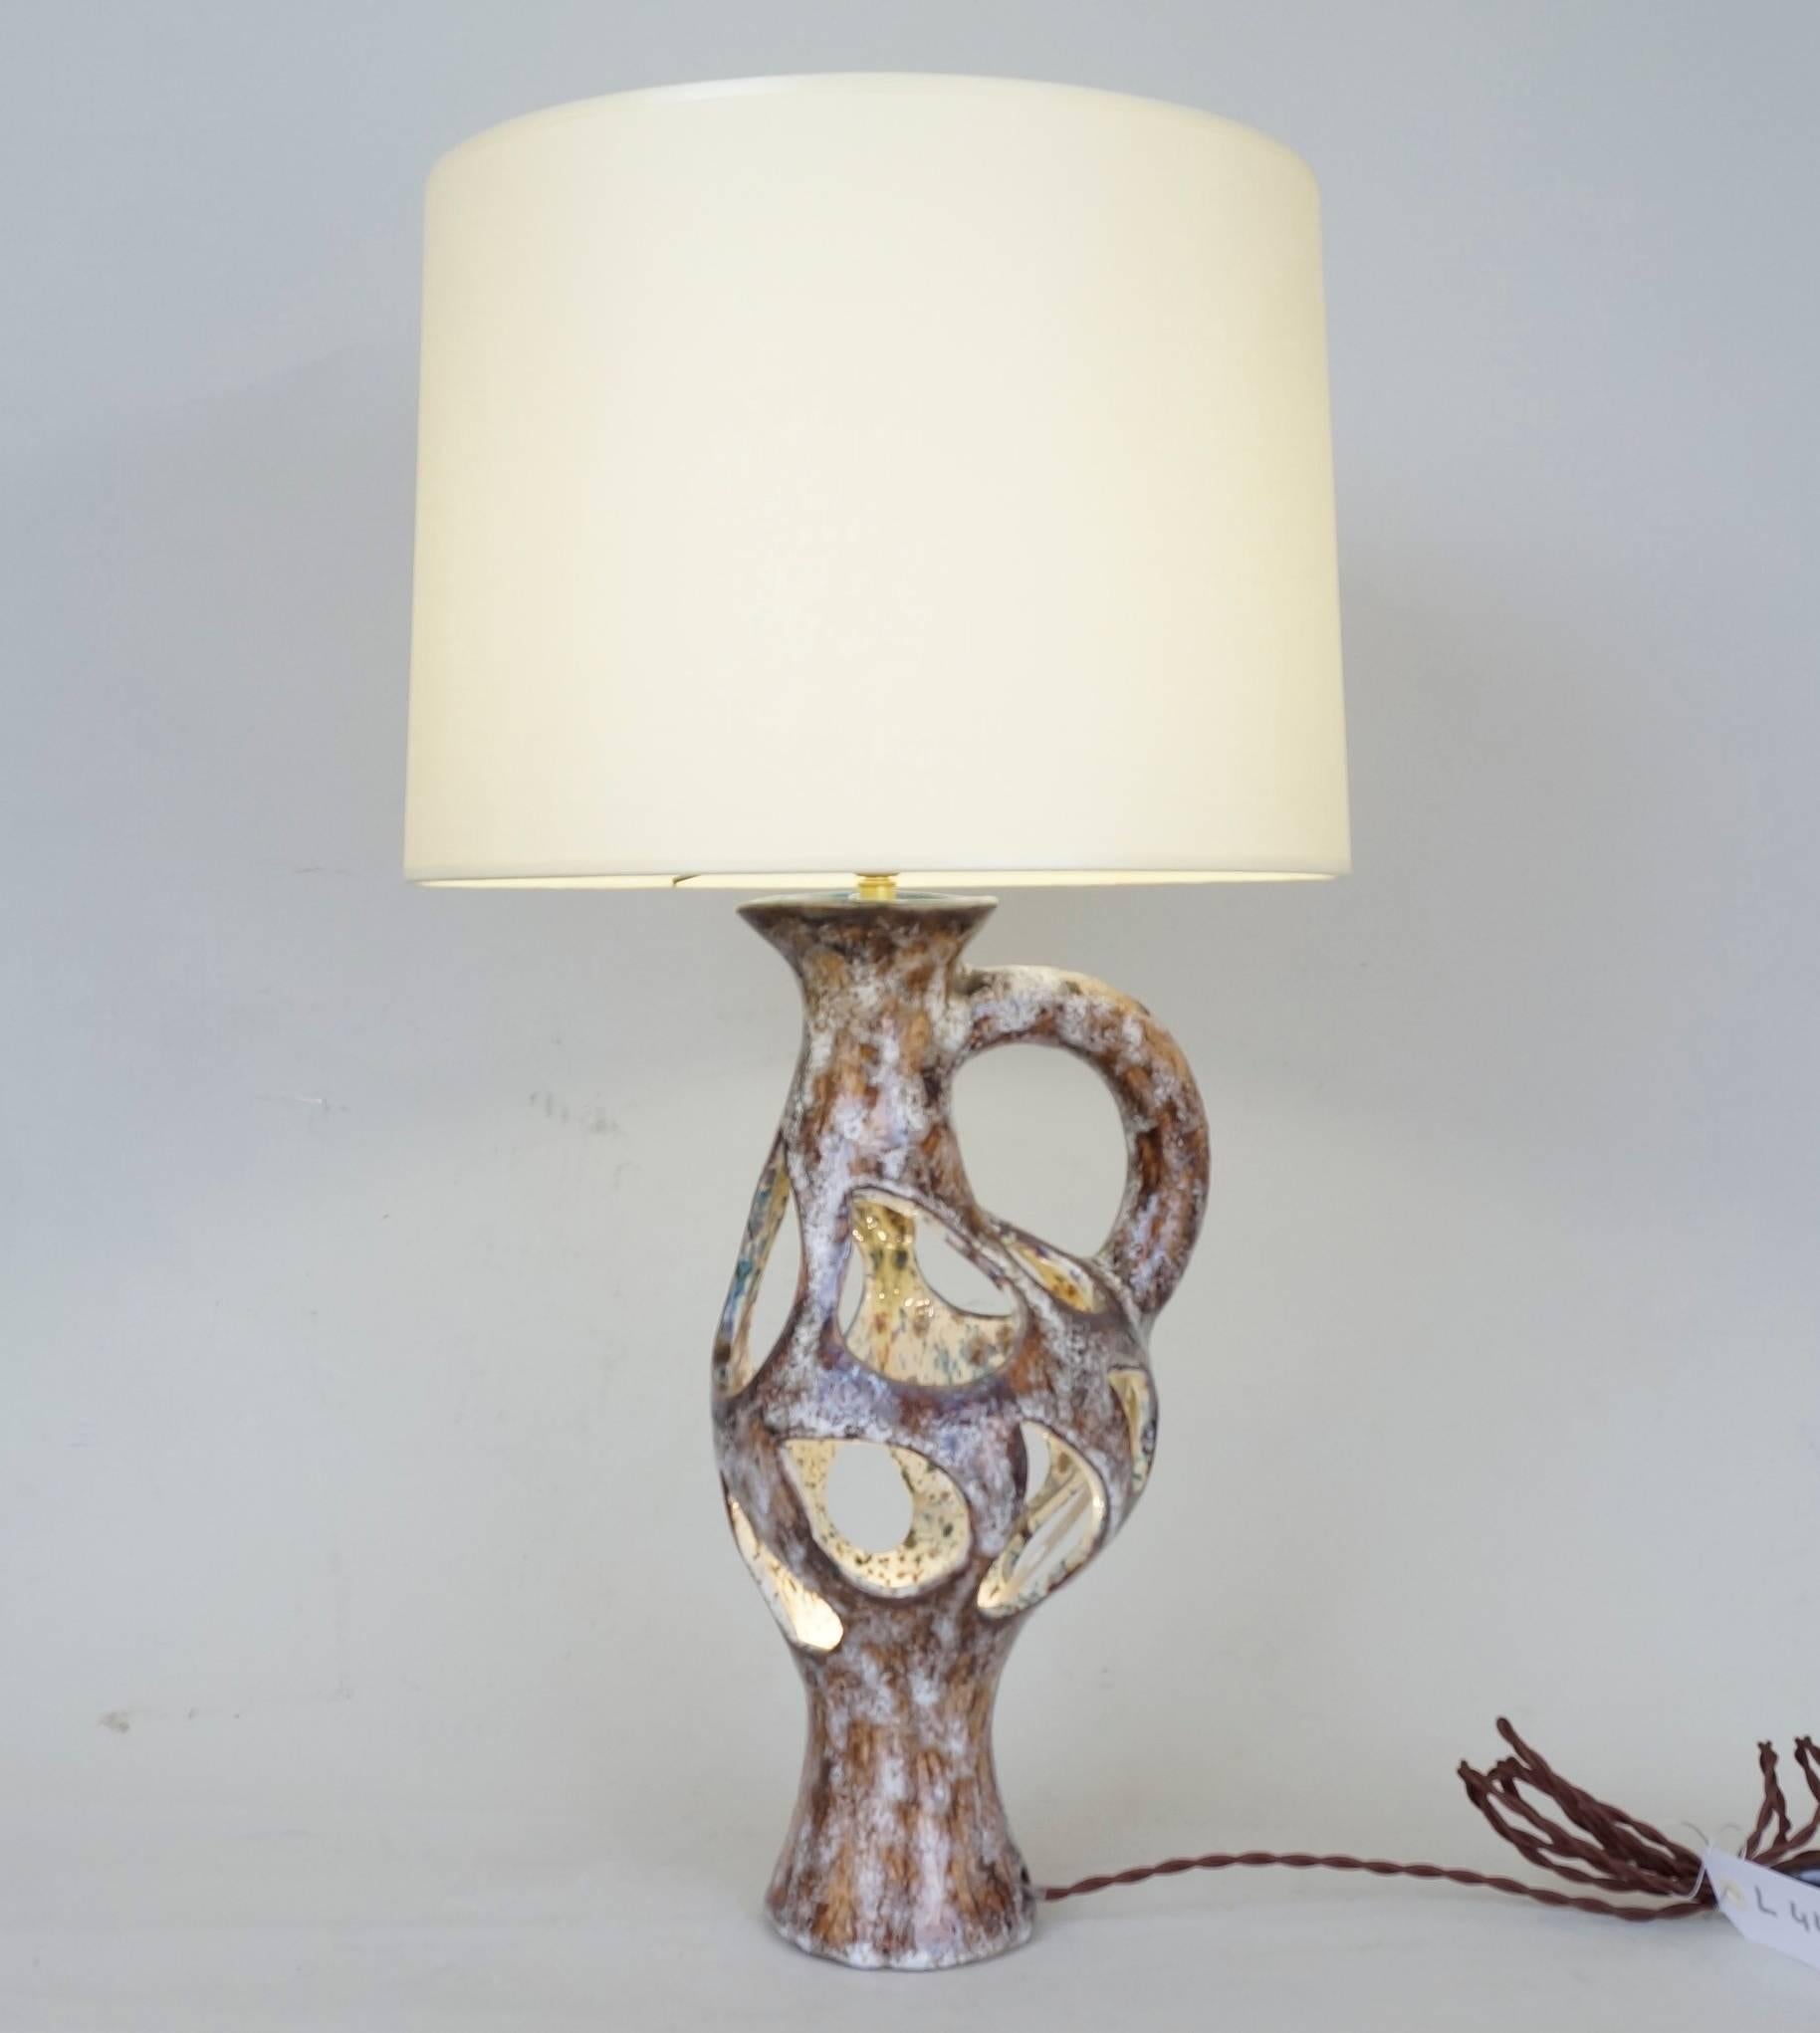 Ceramic table lamp, custom-made fabric lampshade, rewired with twisted silk cord.
US standard plug on request.
Measure: Ceramic body height: 37 cm-14.6 in.
Height with lampshade 60 cm-23.6 in.
     